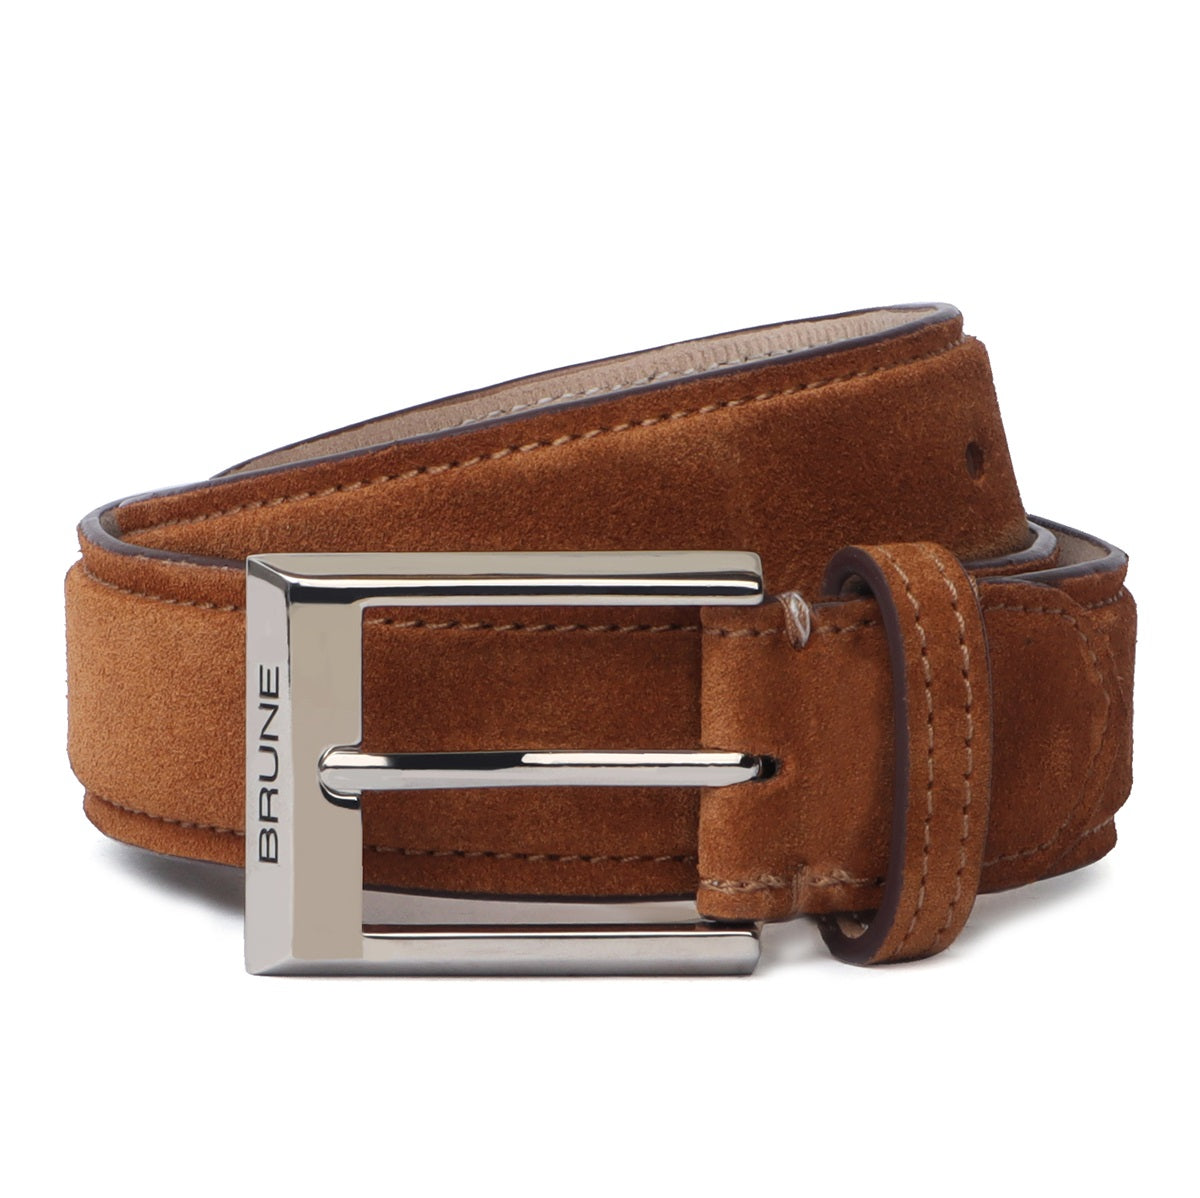 Brown Suede Leather Belt With Silver Metal Buckle for Men By Brune & Bareskin